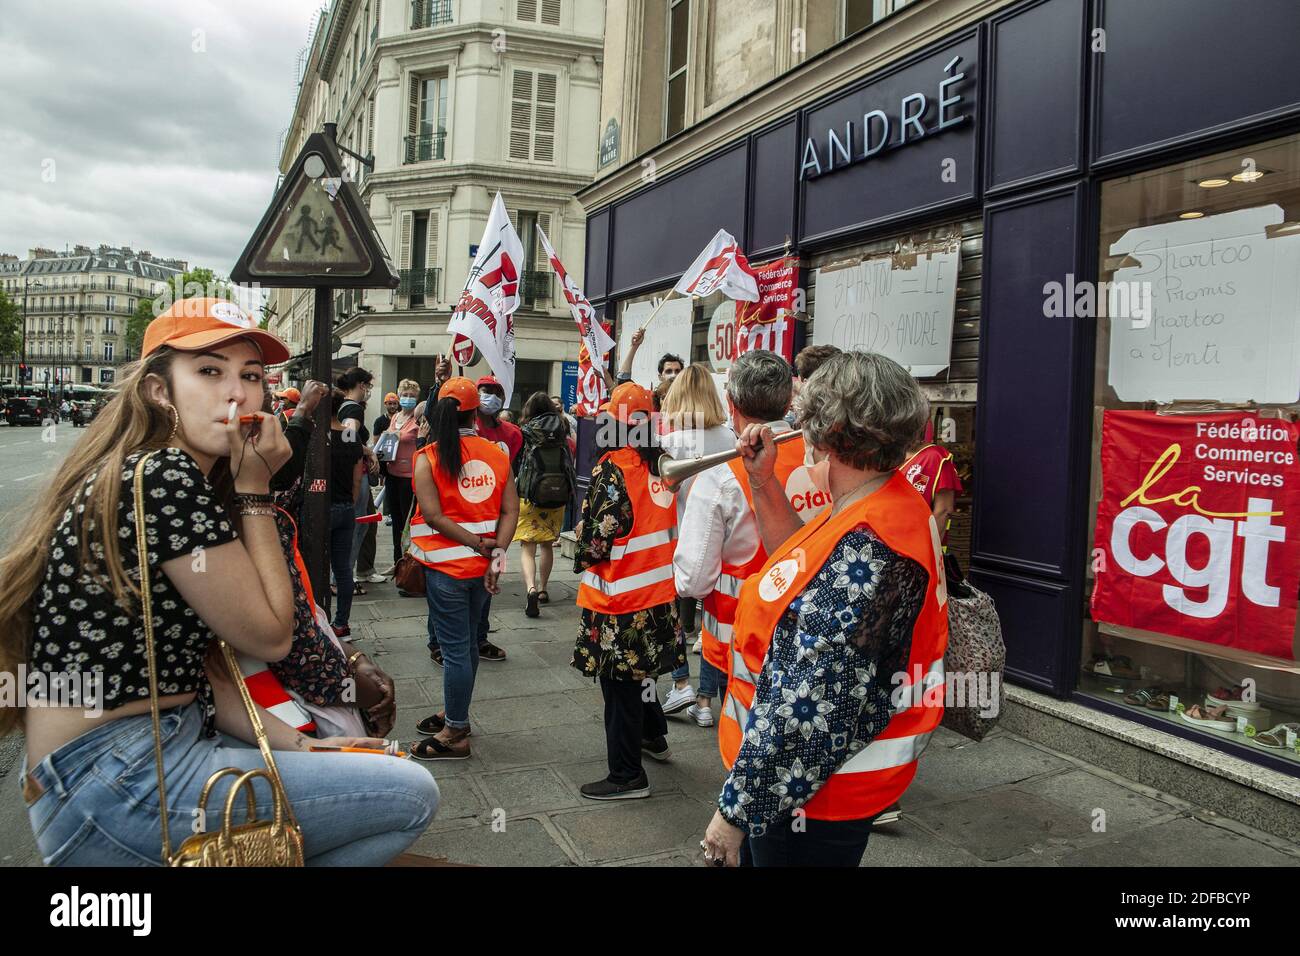 Echt niet voor mij Hoogland Strike movement at the shoe store André, and demonstration of more than 50  people in front of the store in Paris, France on June 30, 2020. The  inter-union, CGT, FO, CFDT protest